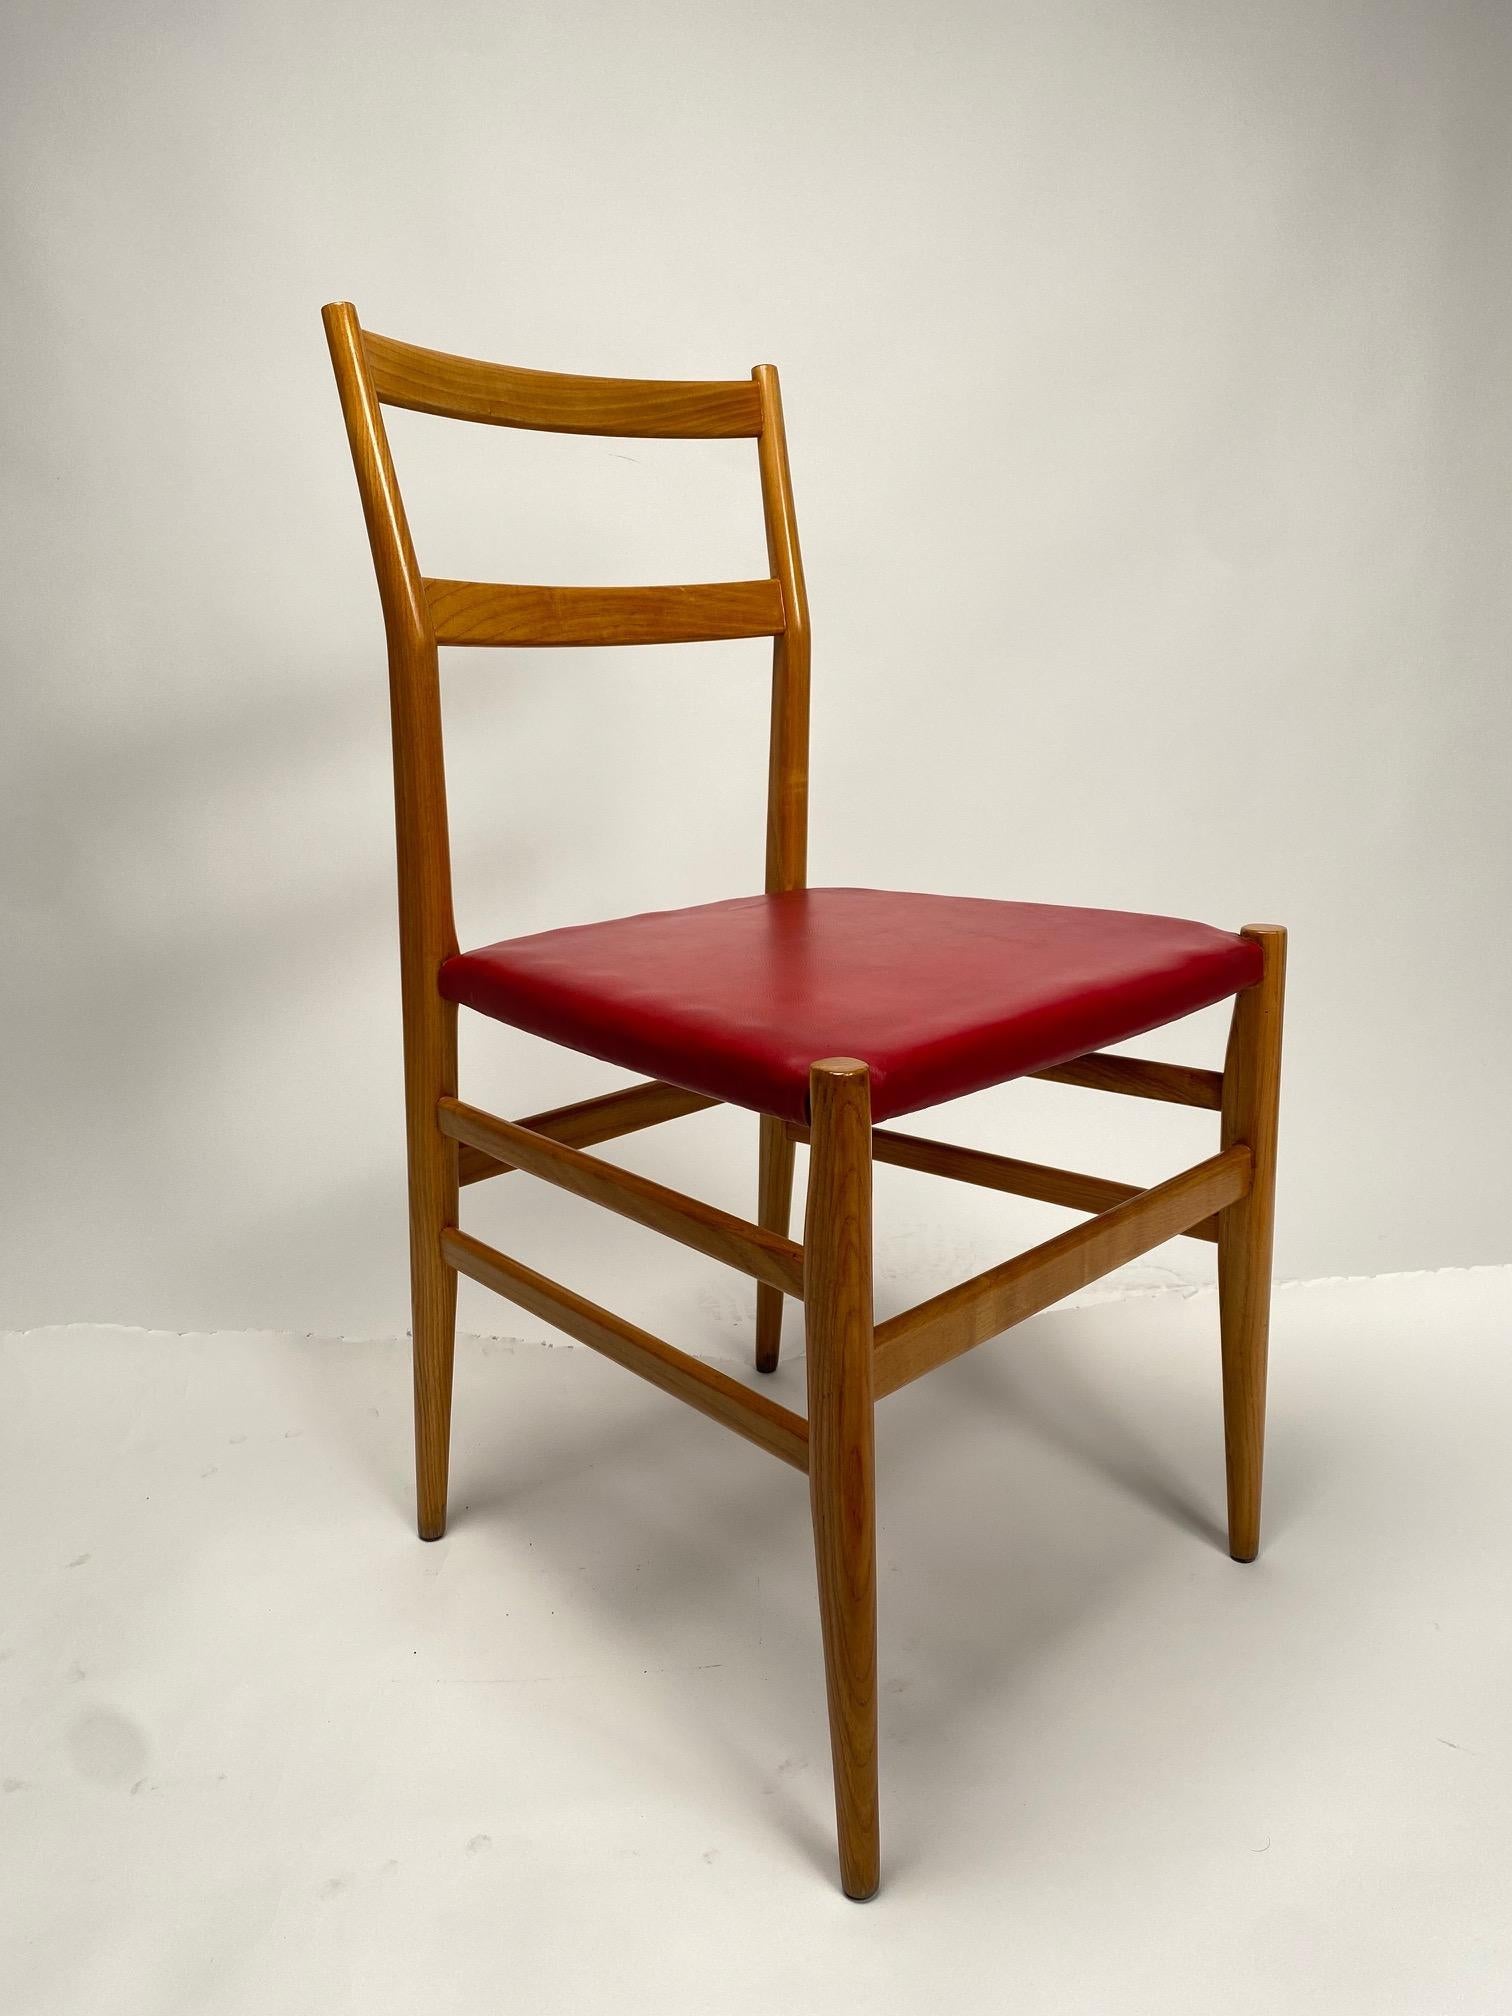 Pair of Leggera chairs in light wood, Gio Ponti, Cassina  (First Edition) For Sale 2